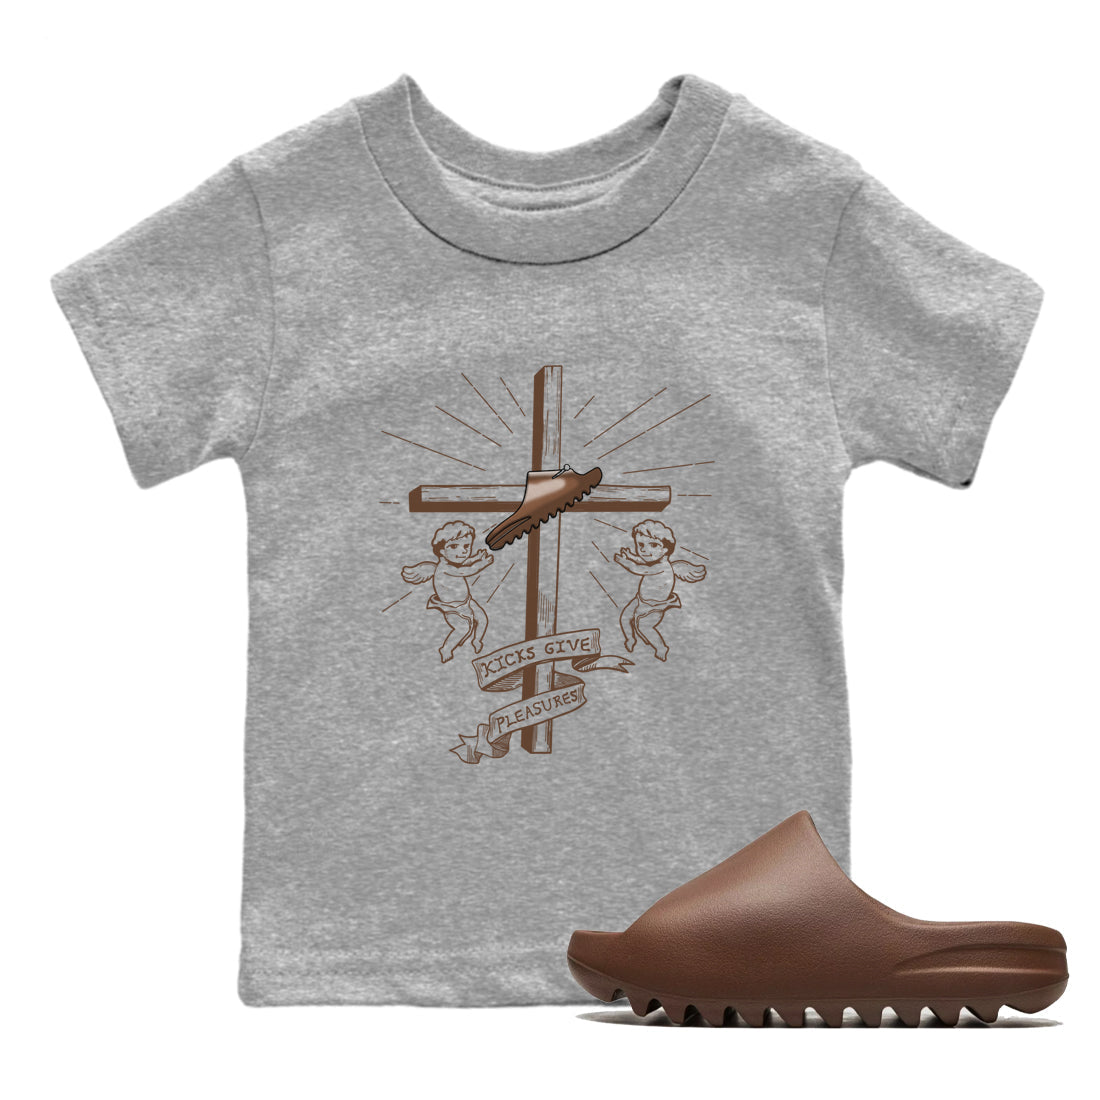 Yeezy Slide Flax shirts to match jordans Kicks Give You Pleasures sneaker match tees Yeezy Slide Flax SNRT Sneaker Tees streetwear brand Baby and Youth Heather Grey 1 cotton tee